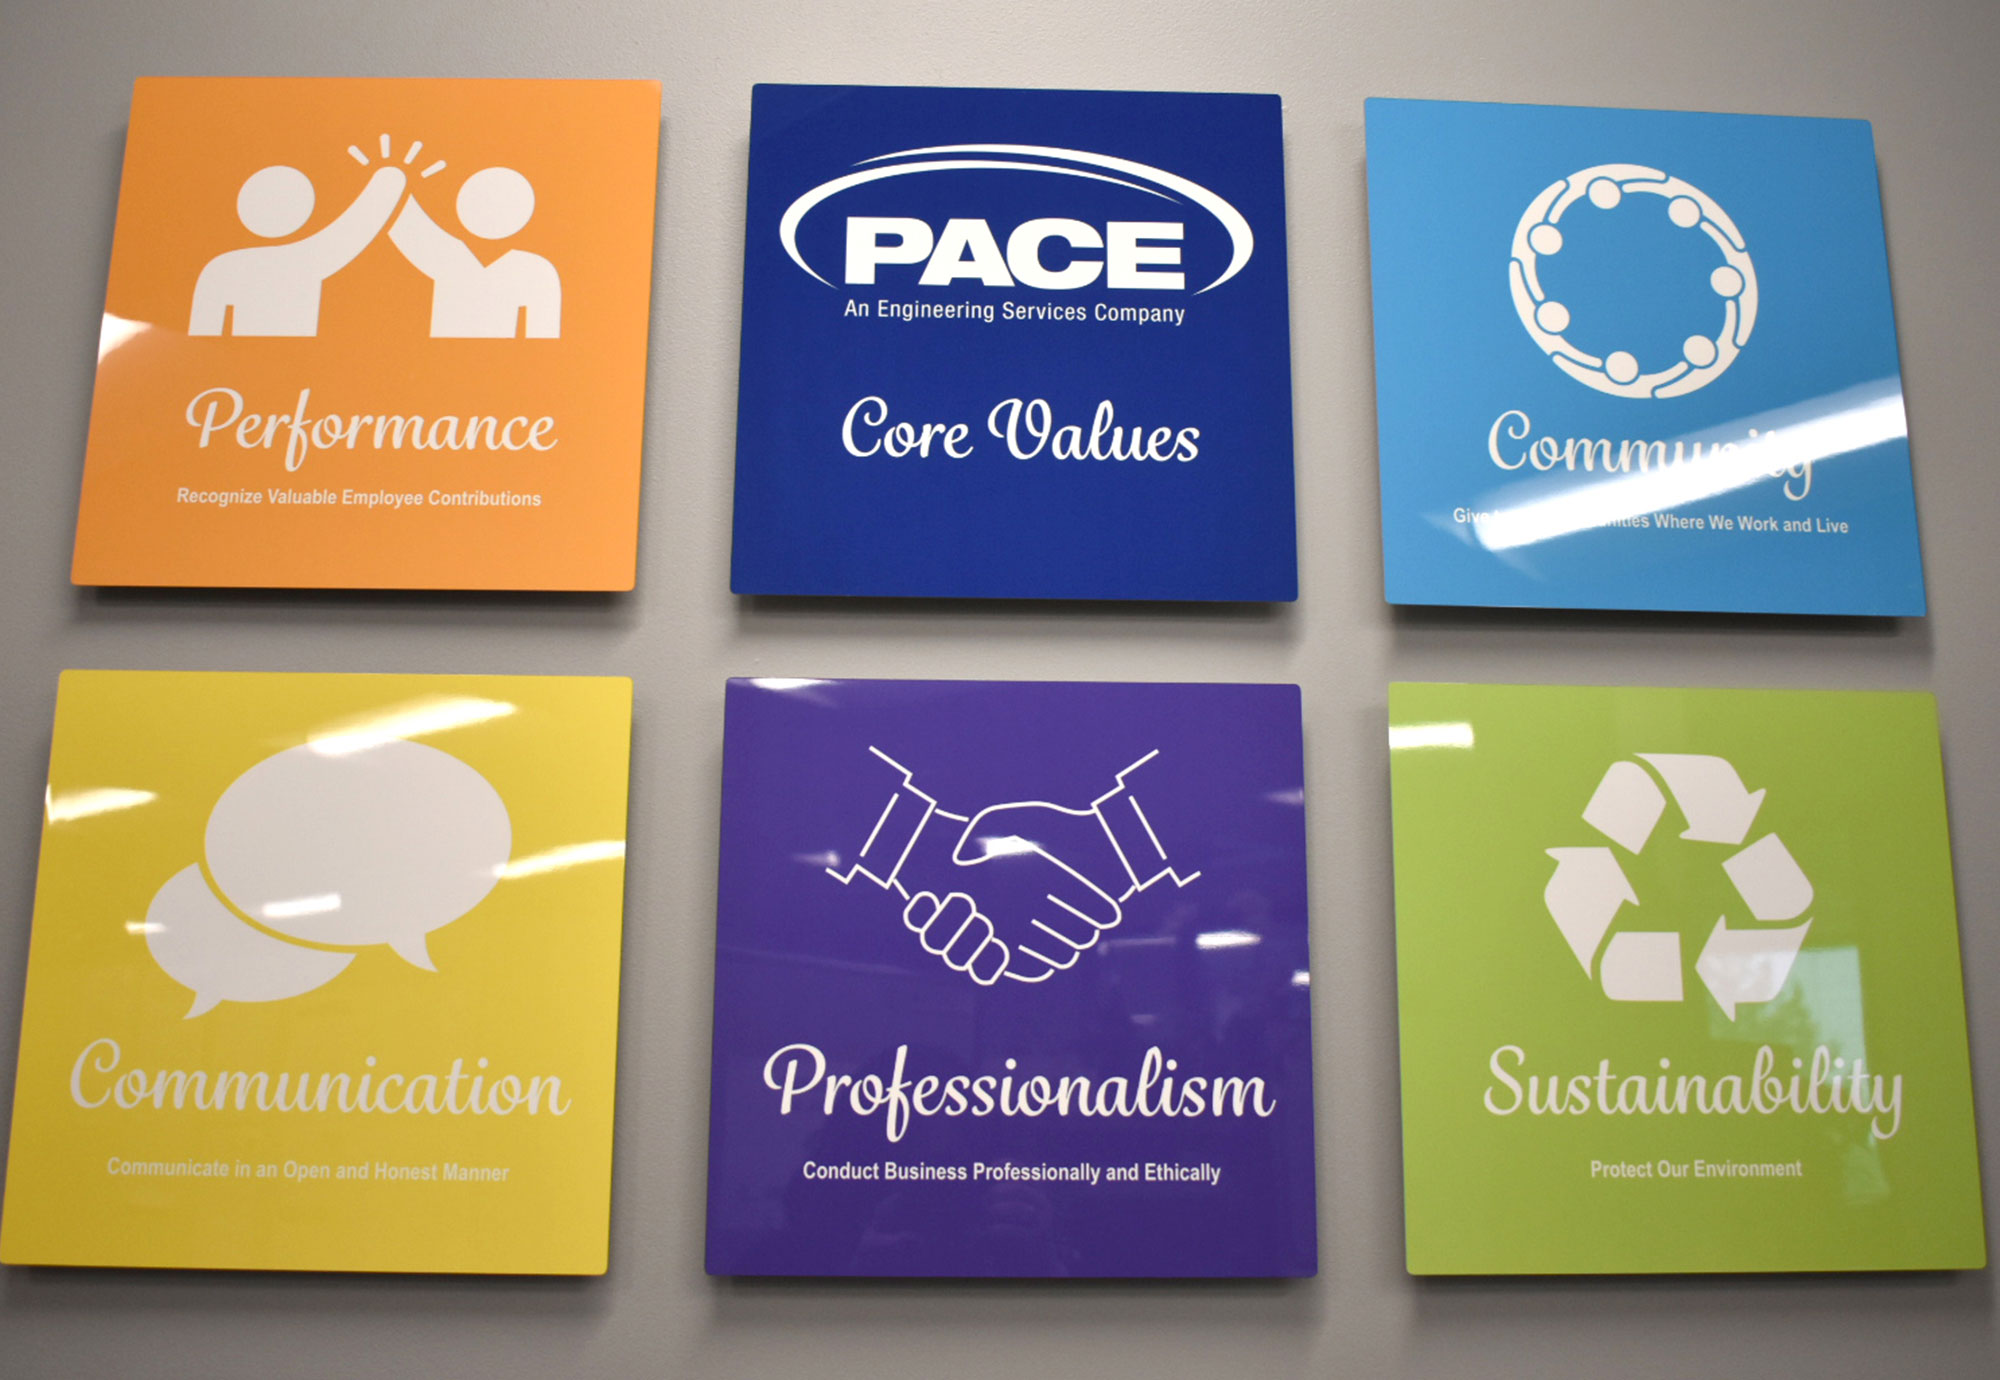 pace-engineers-core-values-signs-united-print-signs-graphics